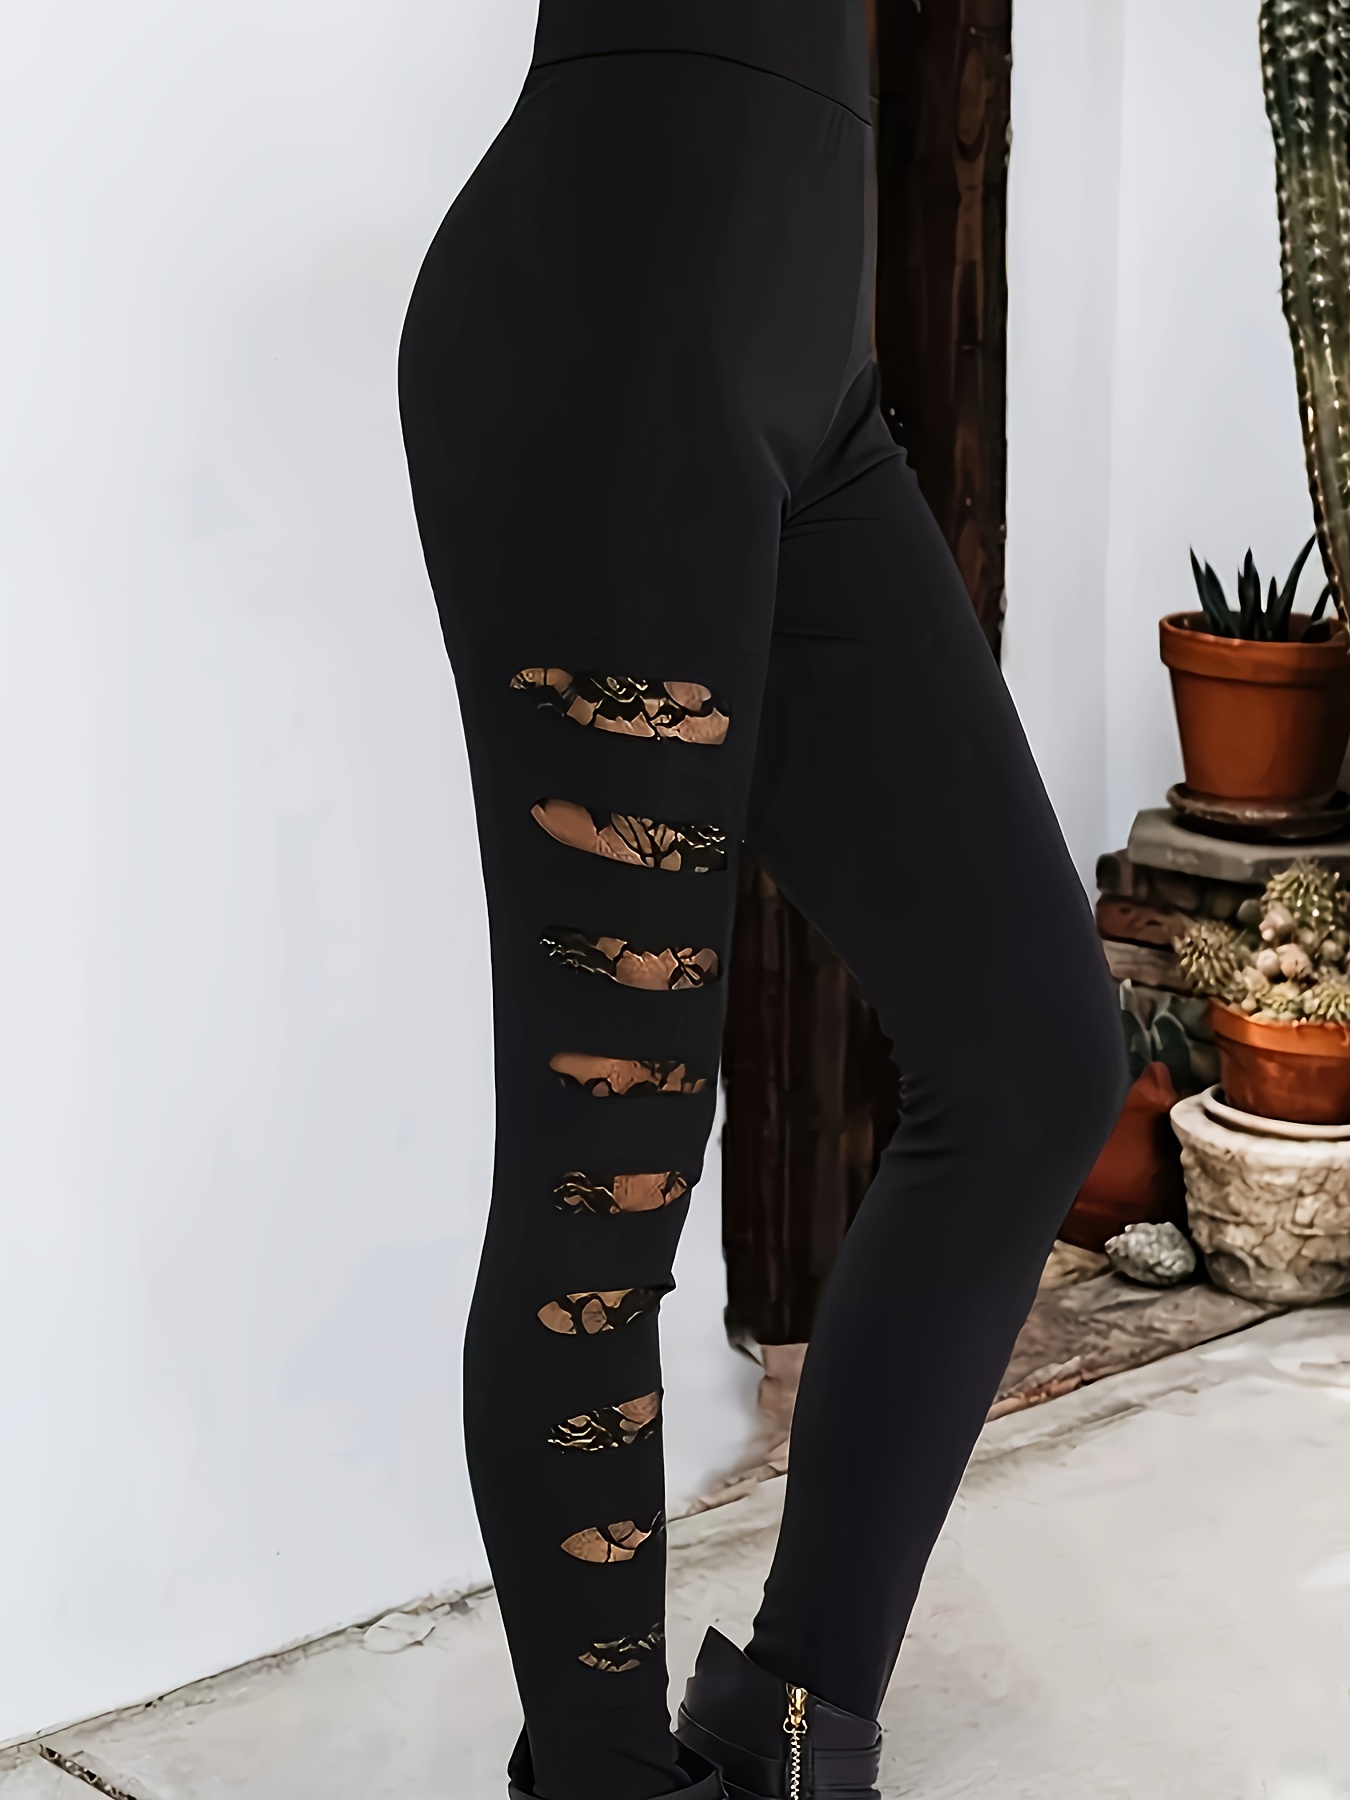 Plus Size Pockets Floral Lace Braided Leggings [45% OFF]